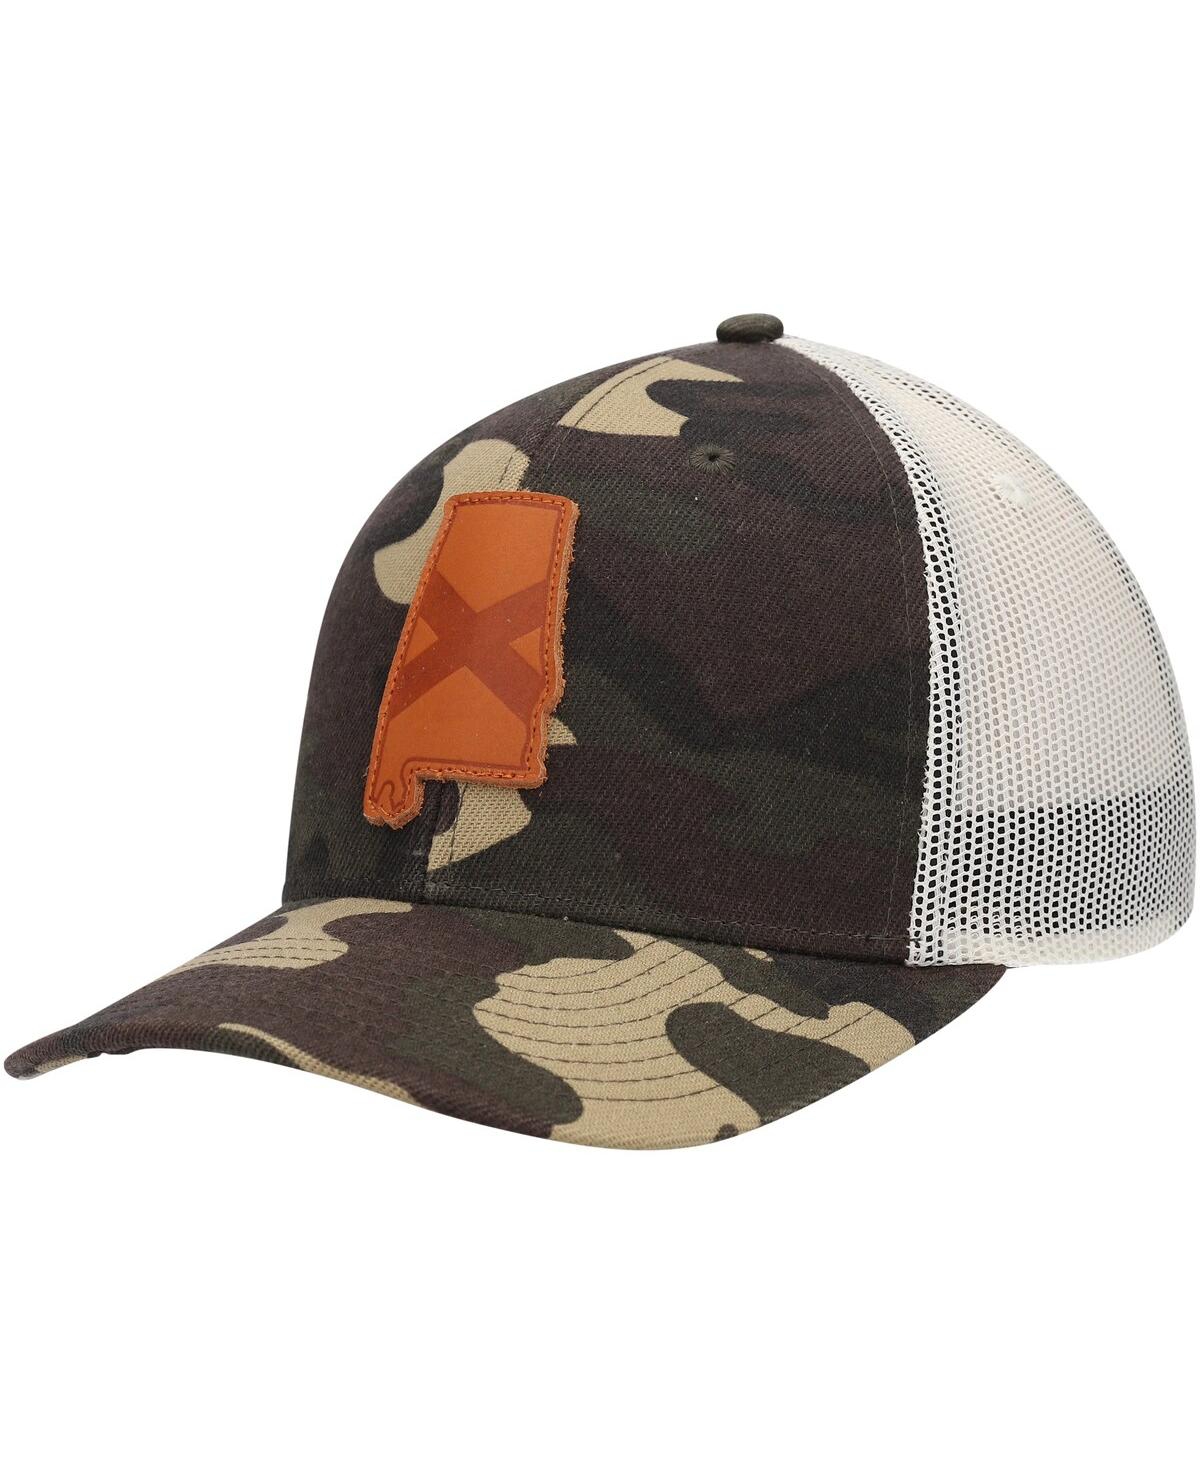 Shop Local Crowns Men's  Camo Alabama Icon Woodland State Patch Trucker Snapback Hat